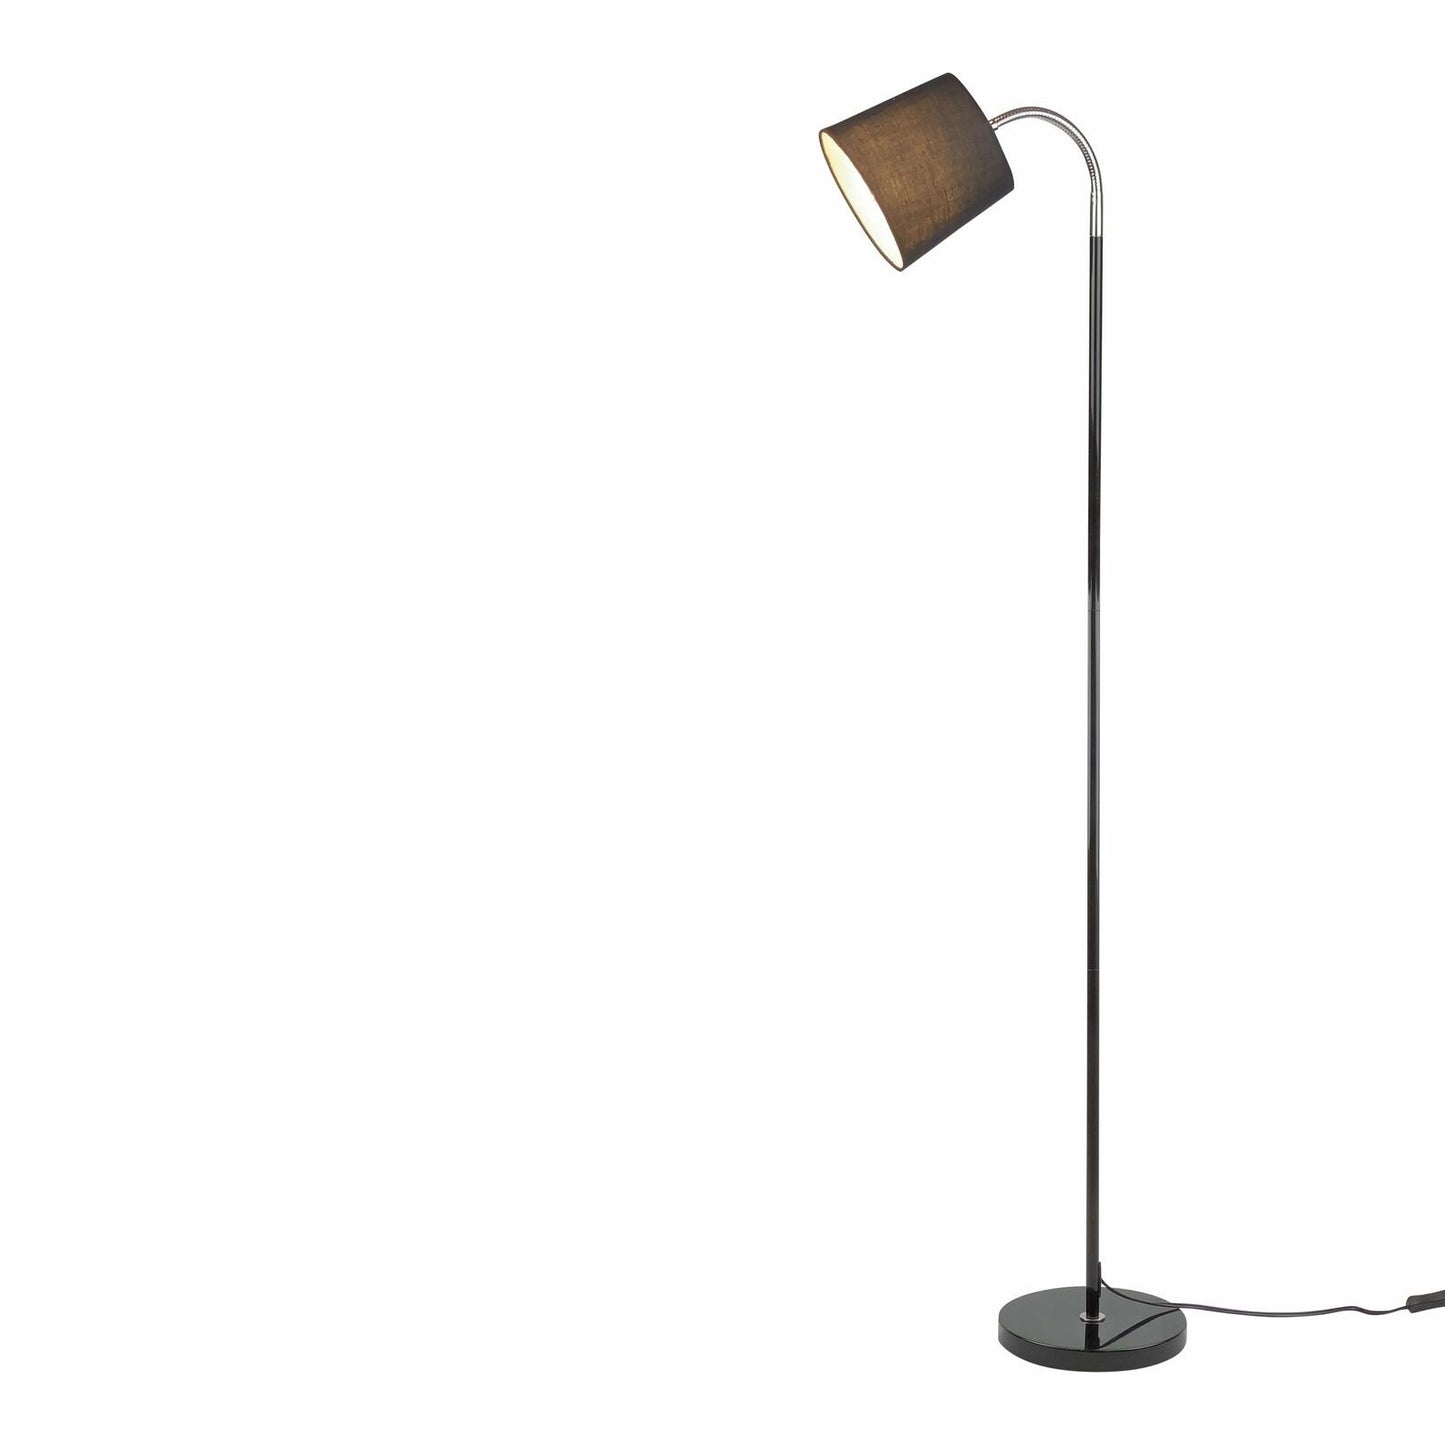 Floor Lamp With Chrome Adjustable Gooseneck Head Lamp And Fabric Drum Lamp Shade